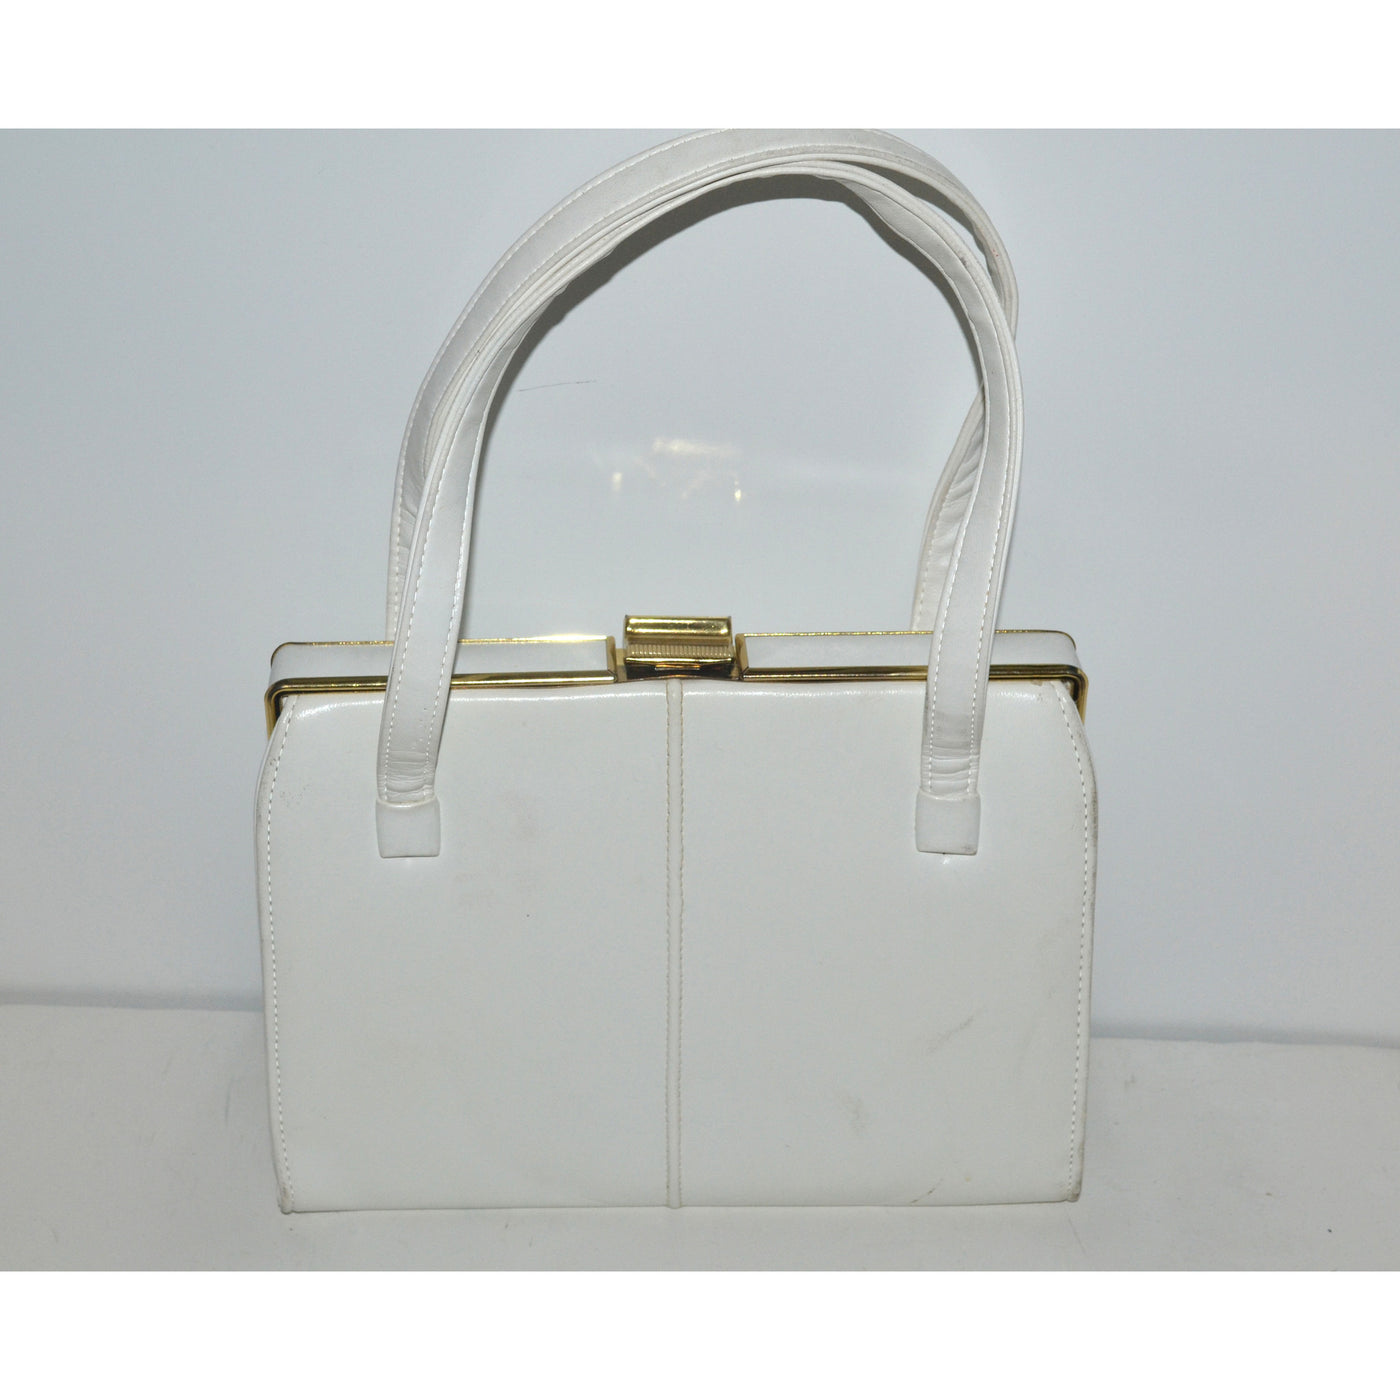 Vintage White Simulated Leather Purse